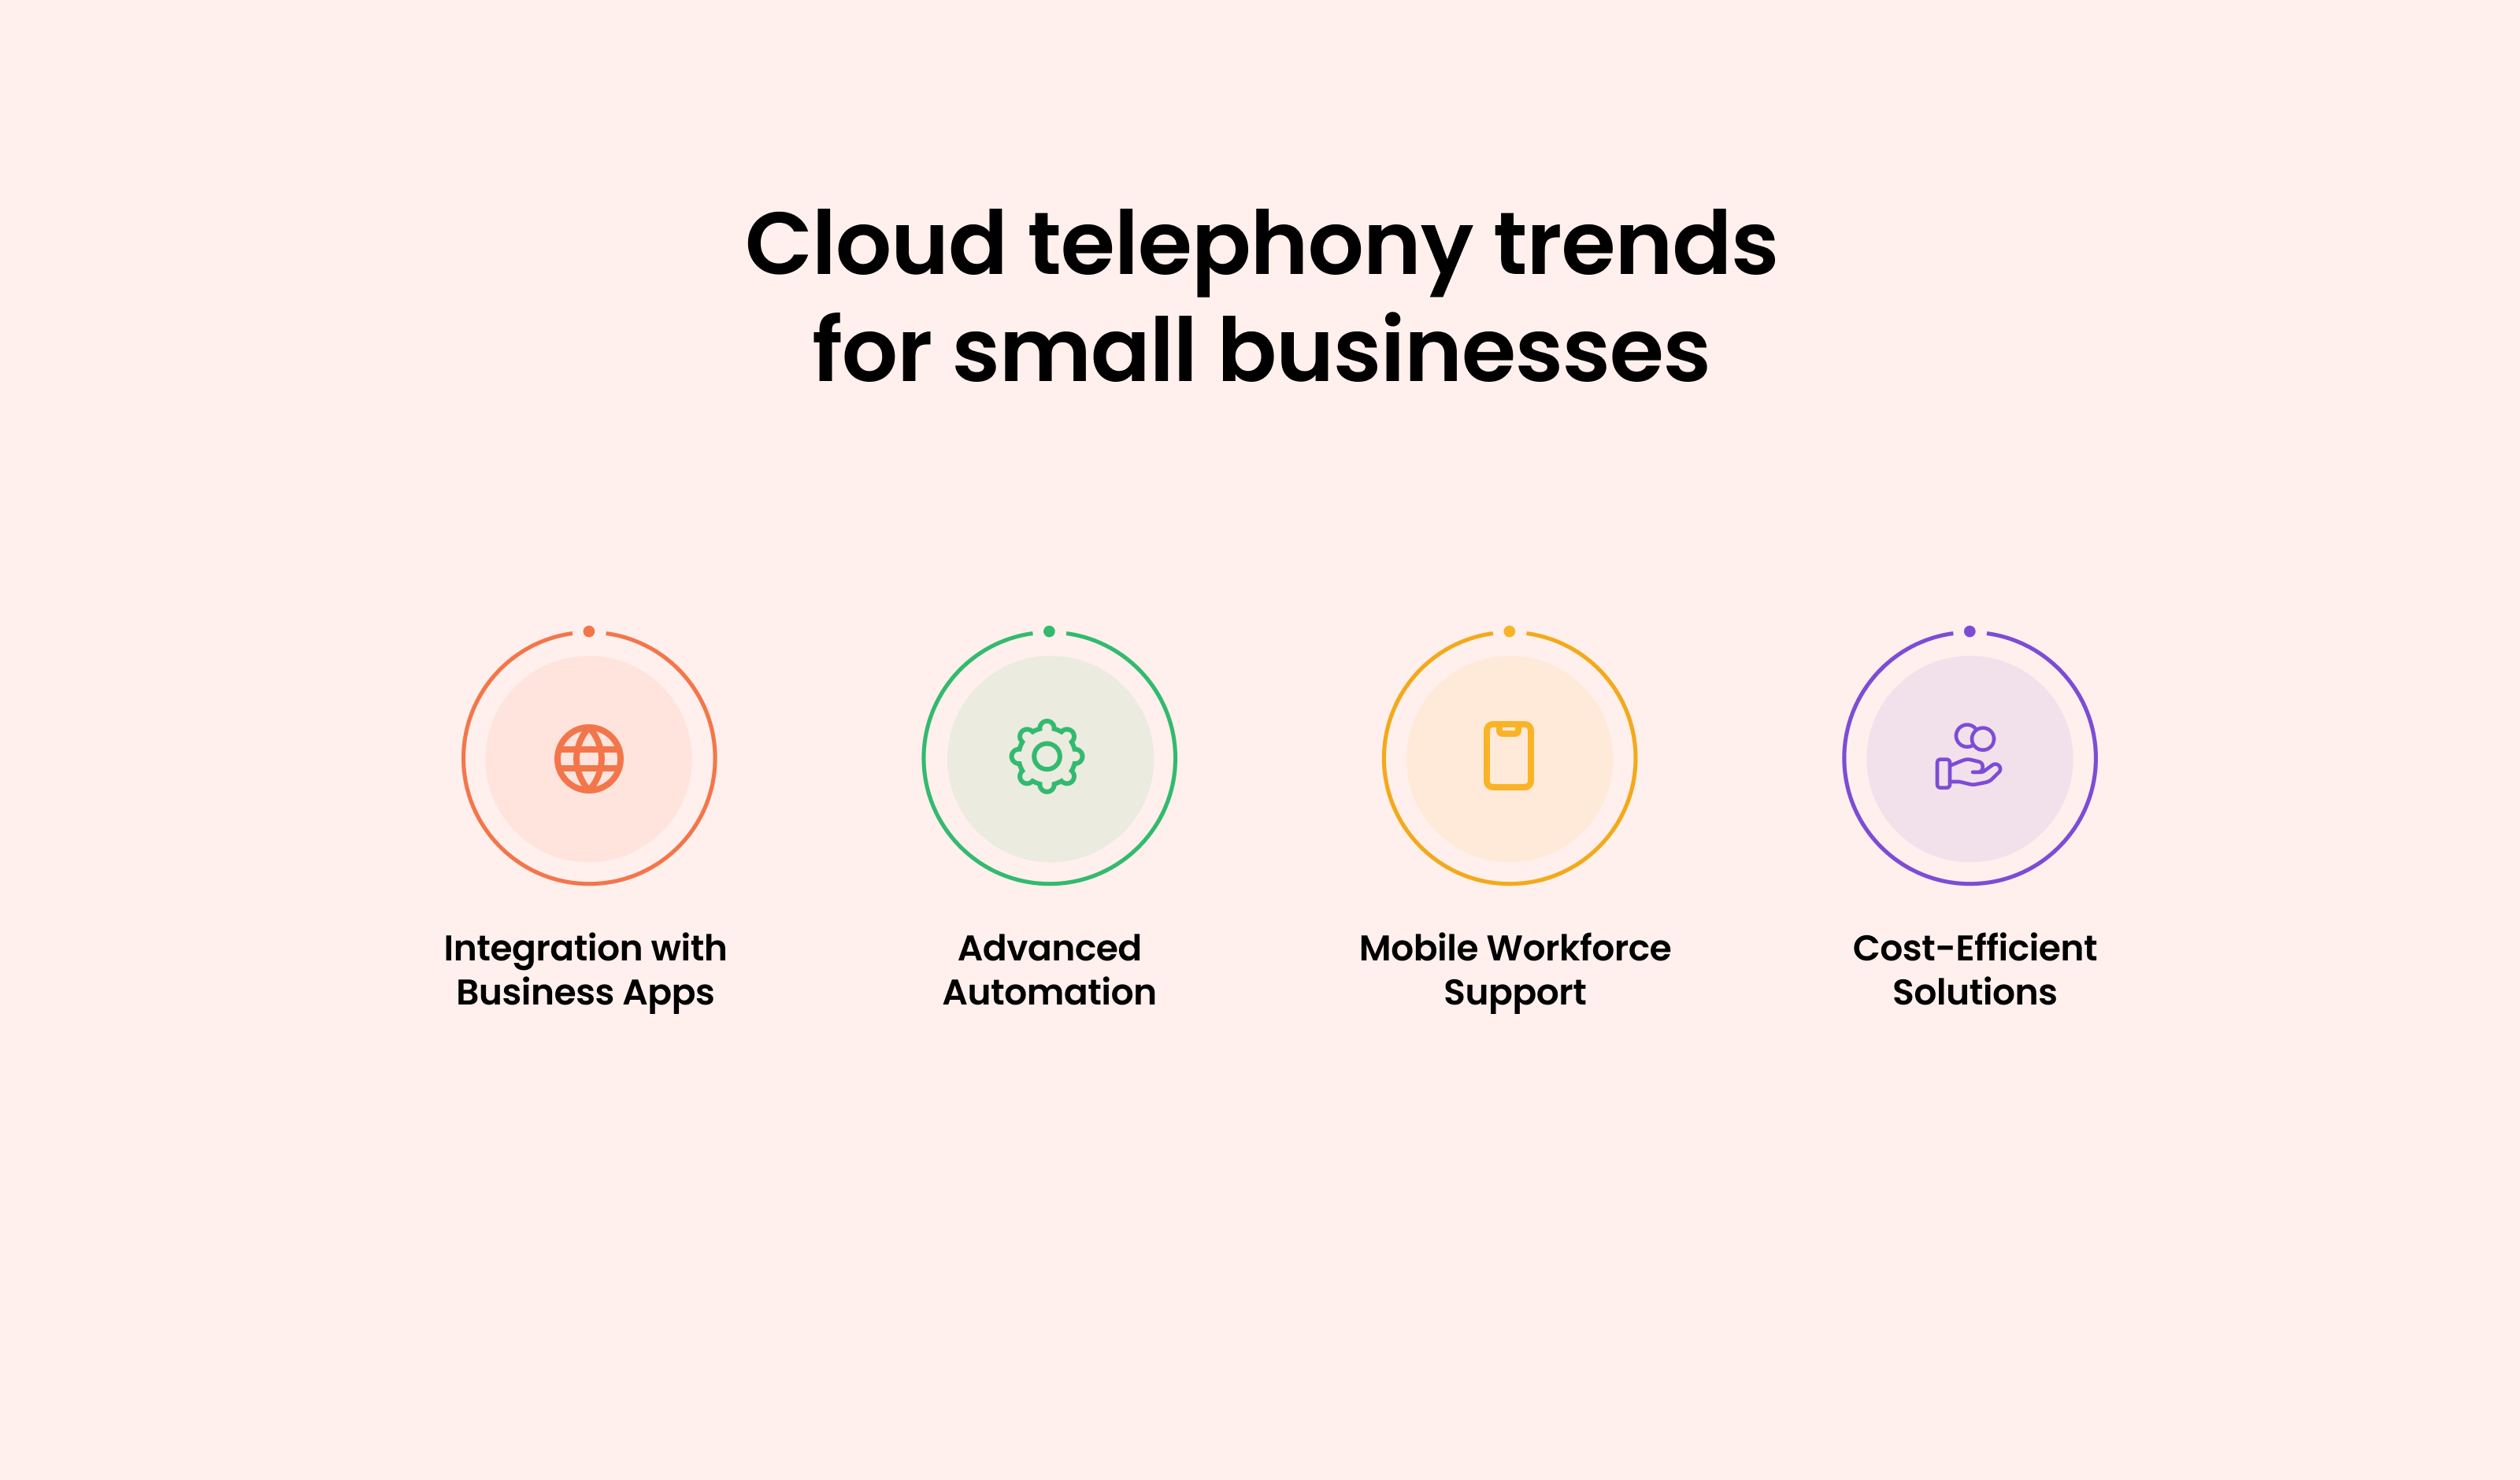 Cloud Telephony Trends for Small Businesses: